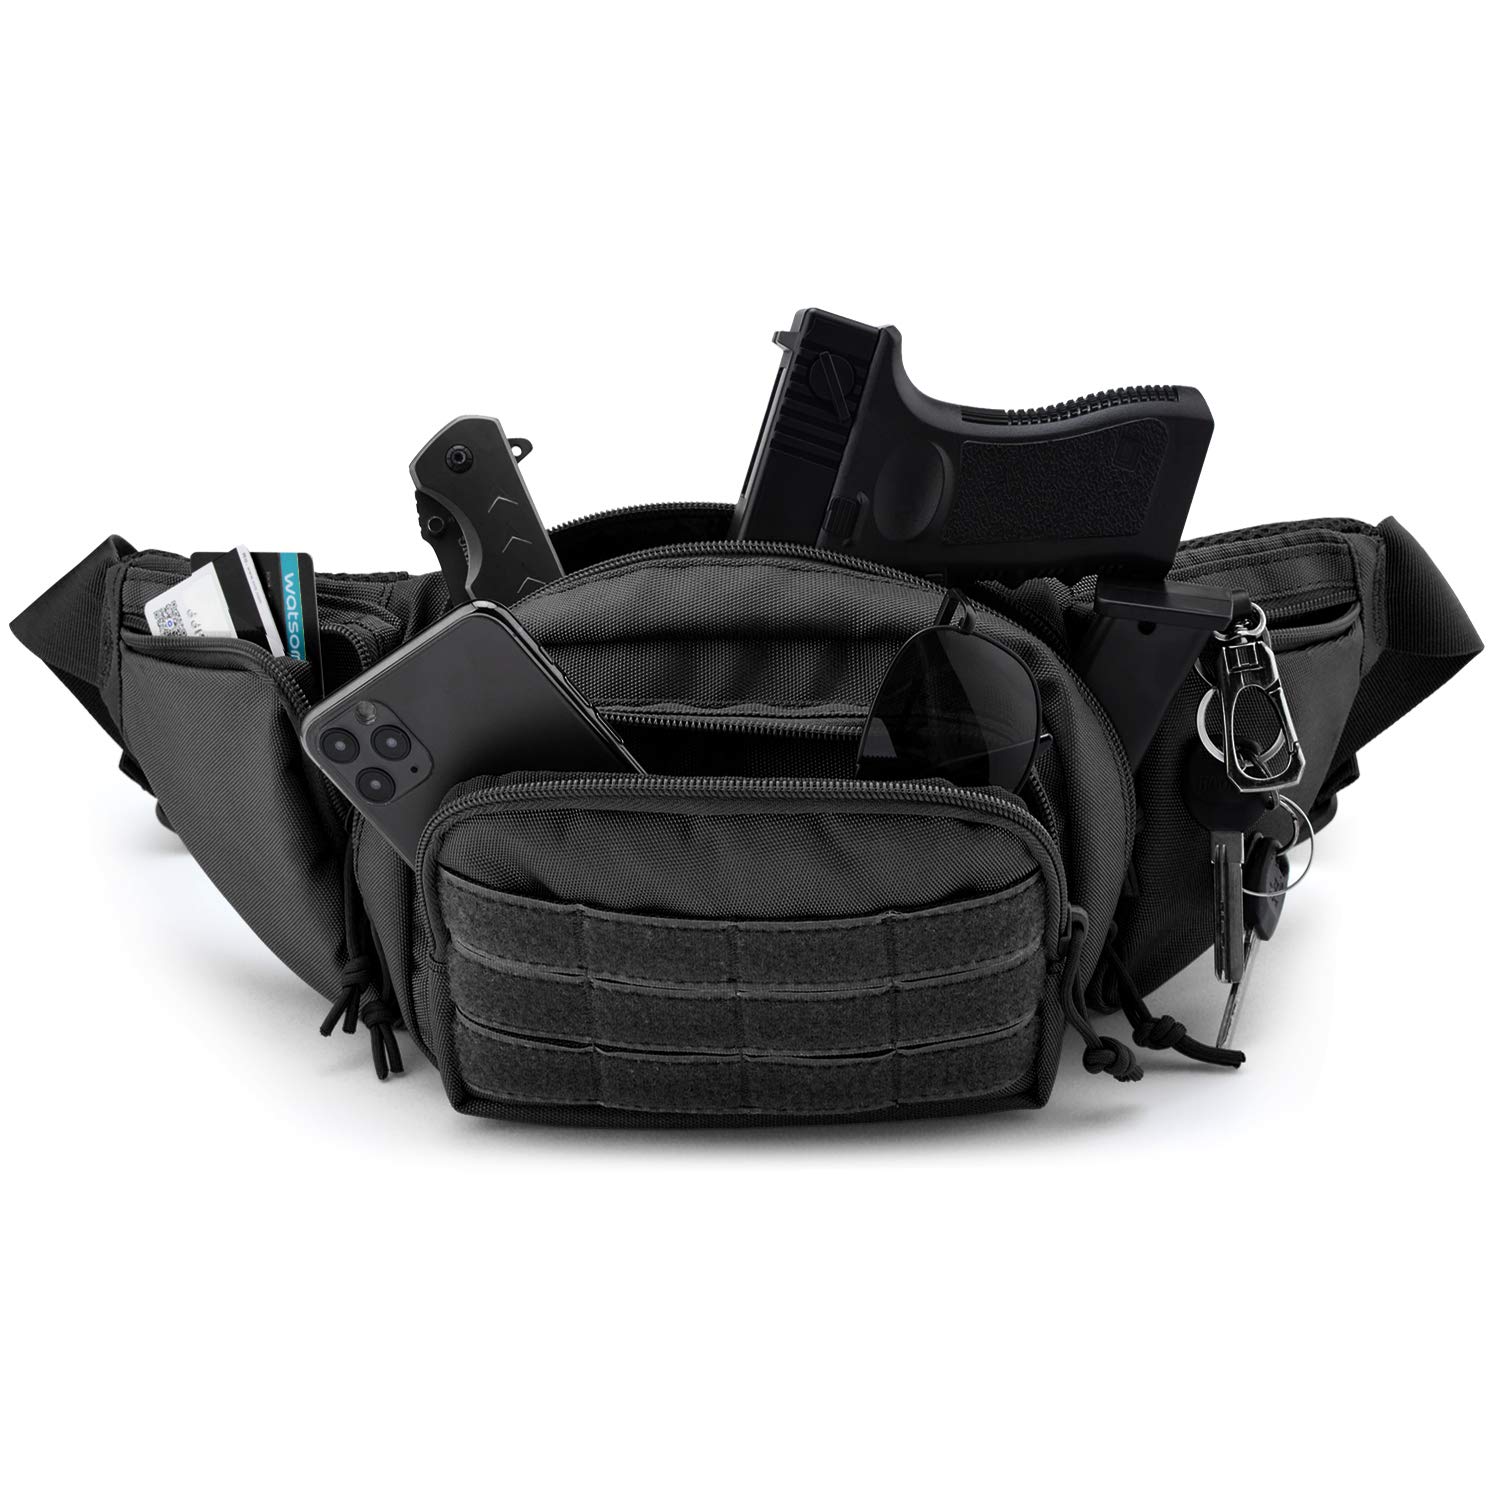 📢Big Sale 49% OFF - Ultimate Fanny Pack Holsterd